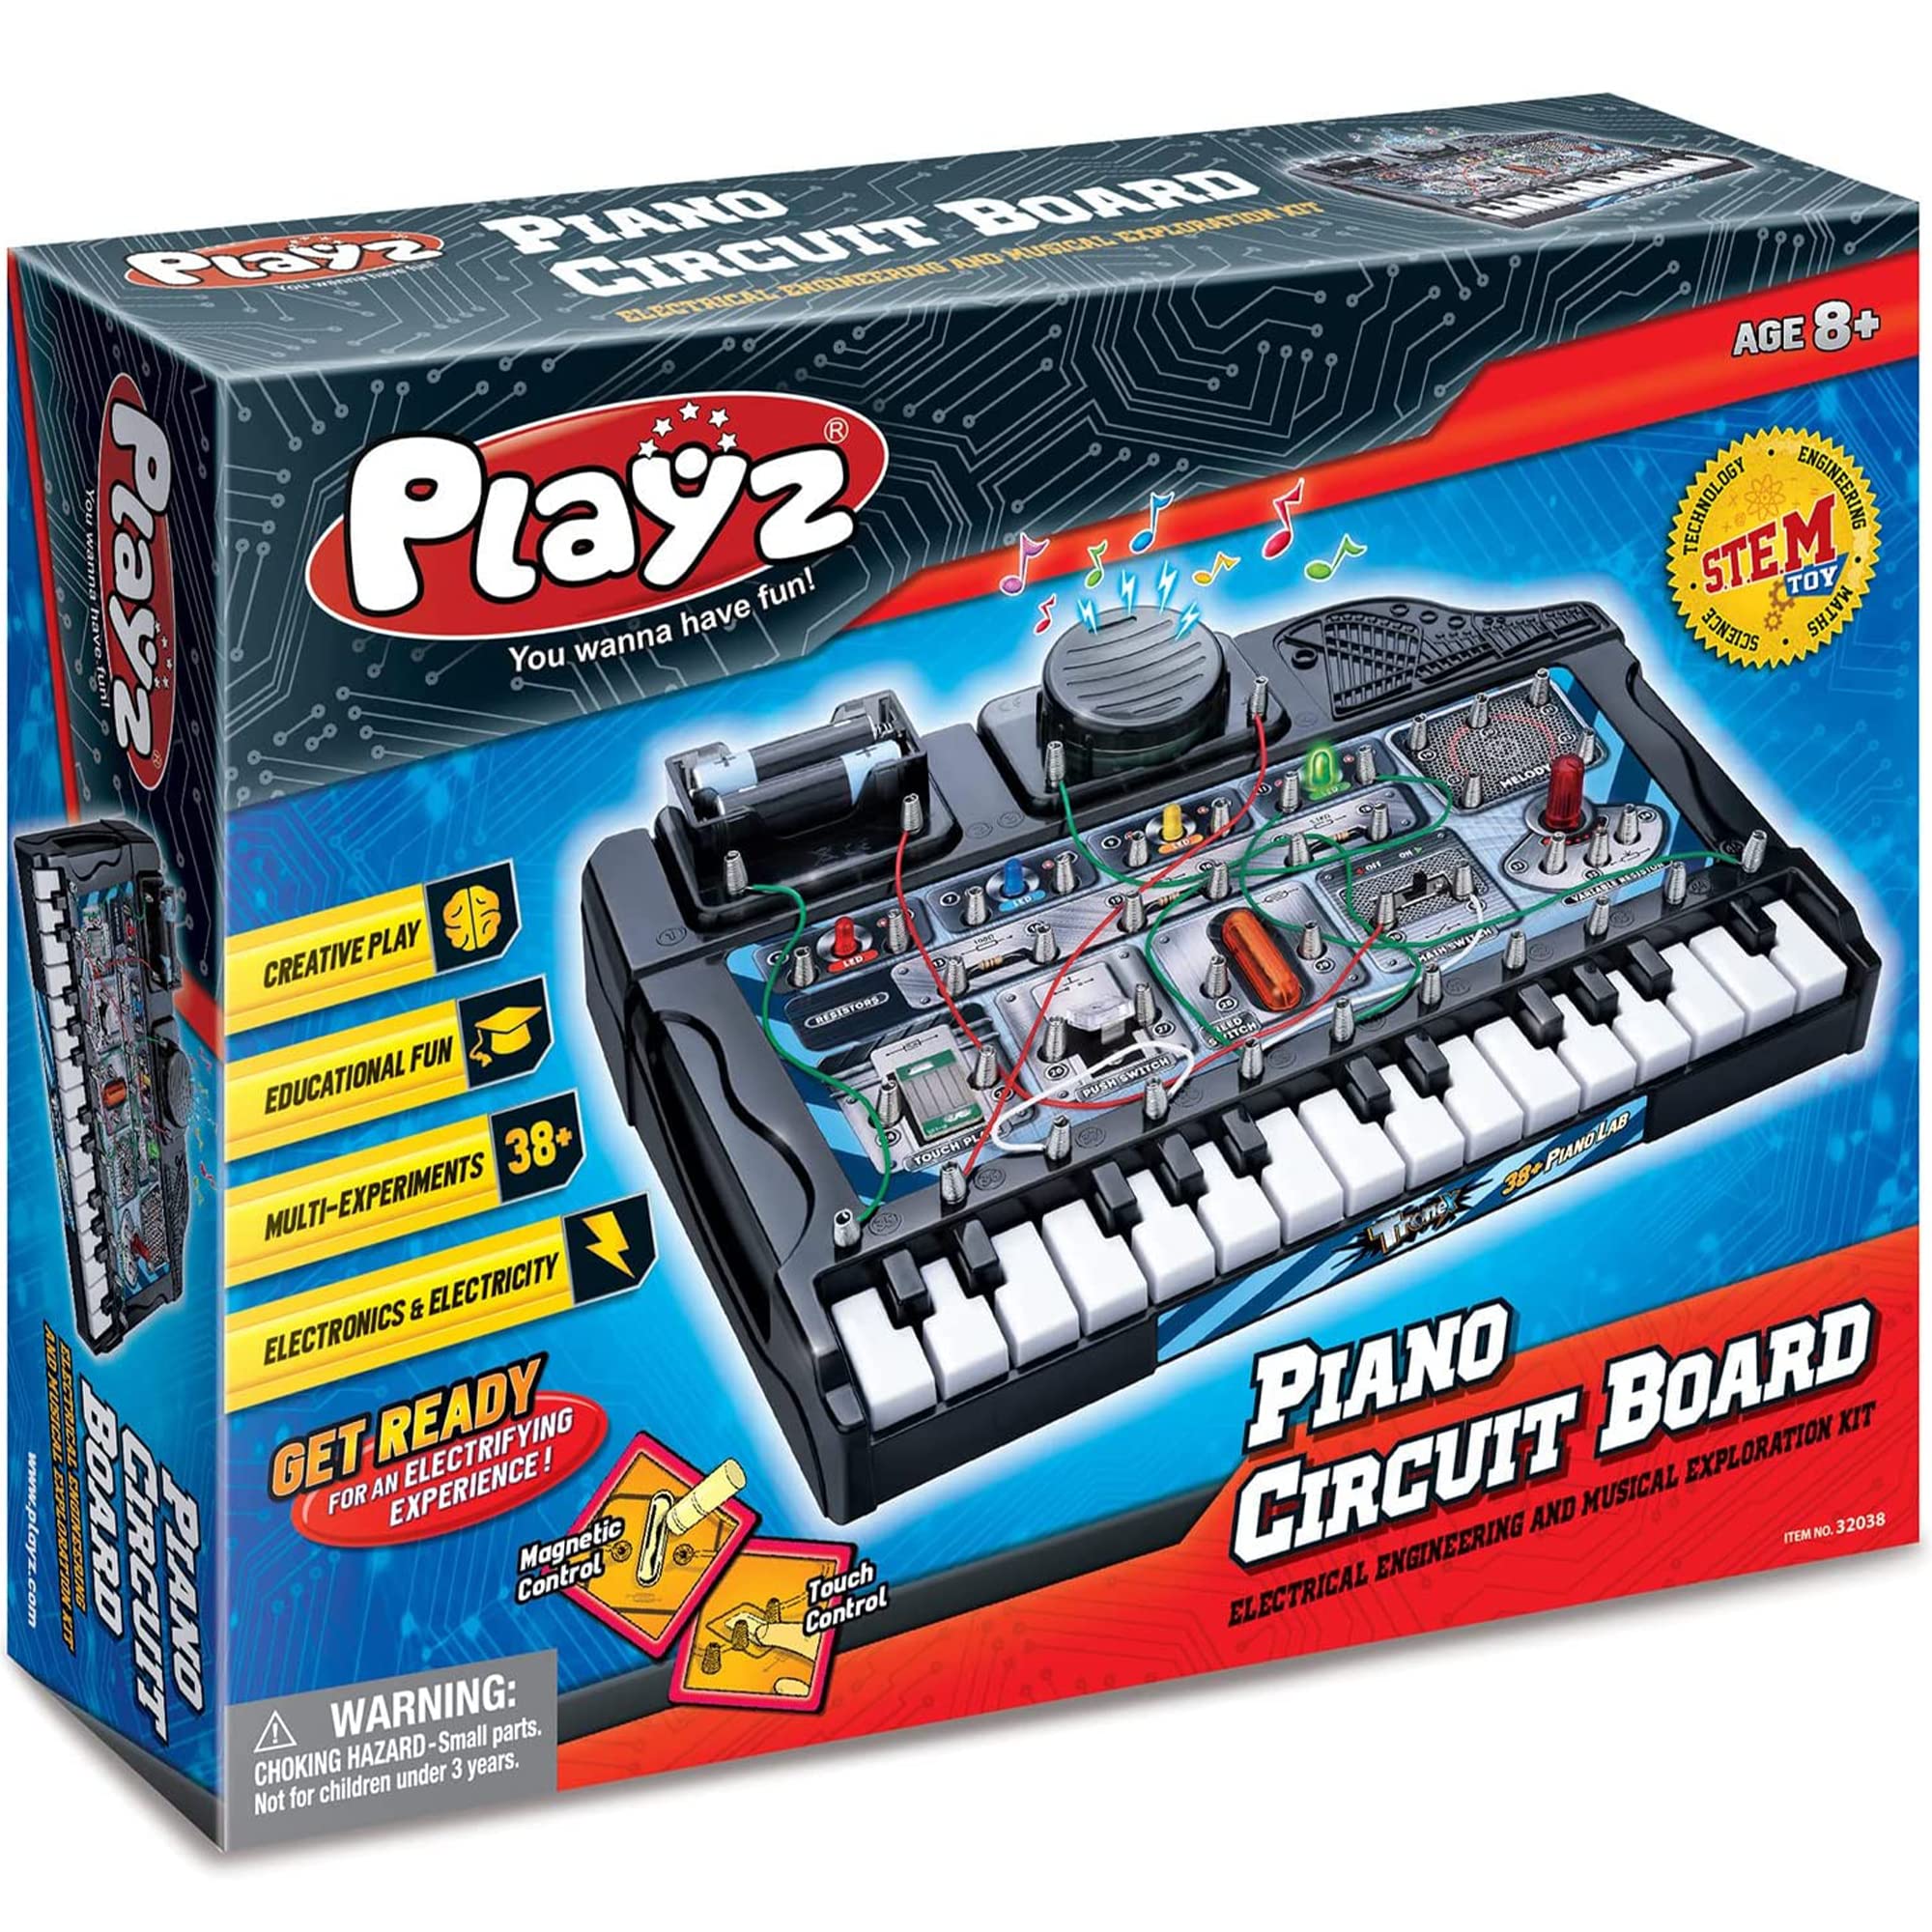 Playz Electric Piano Circuit Board for Kids